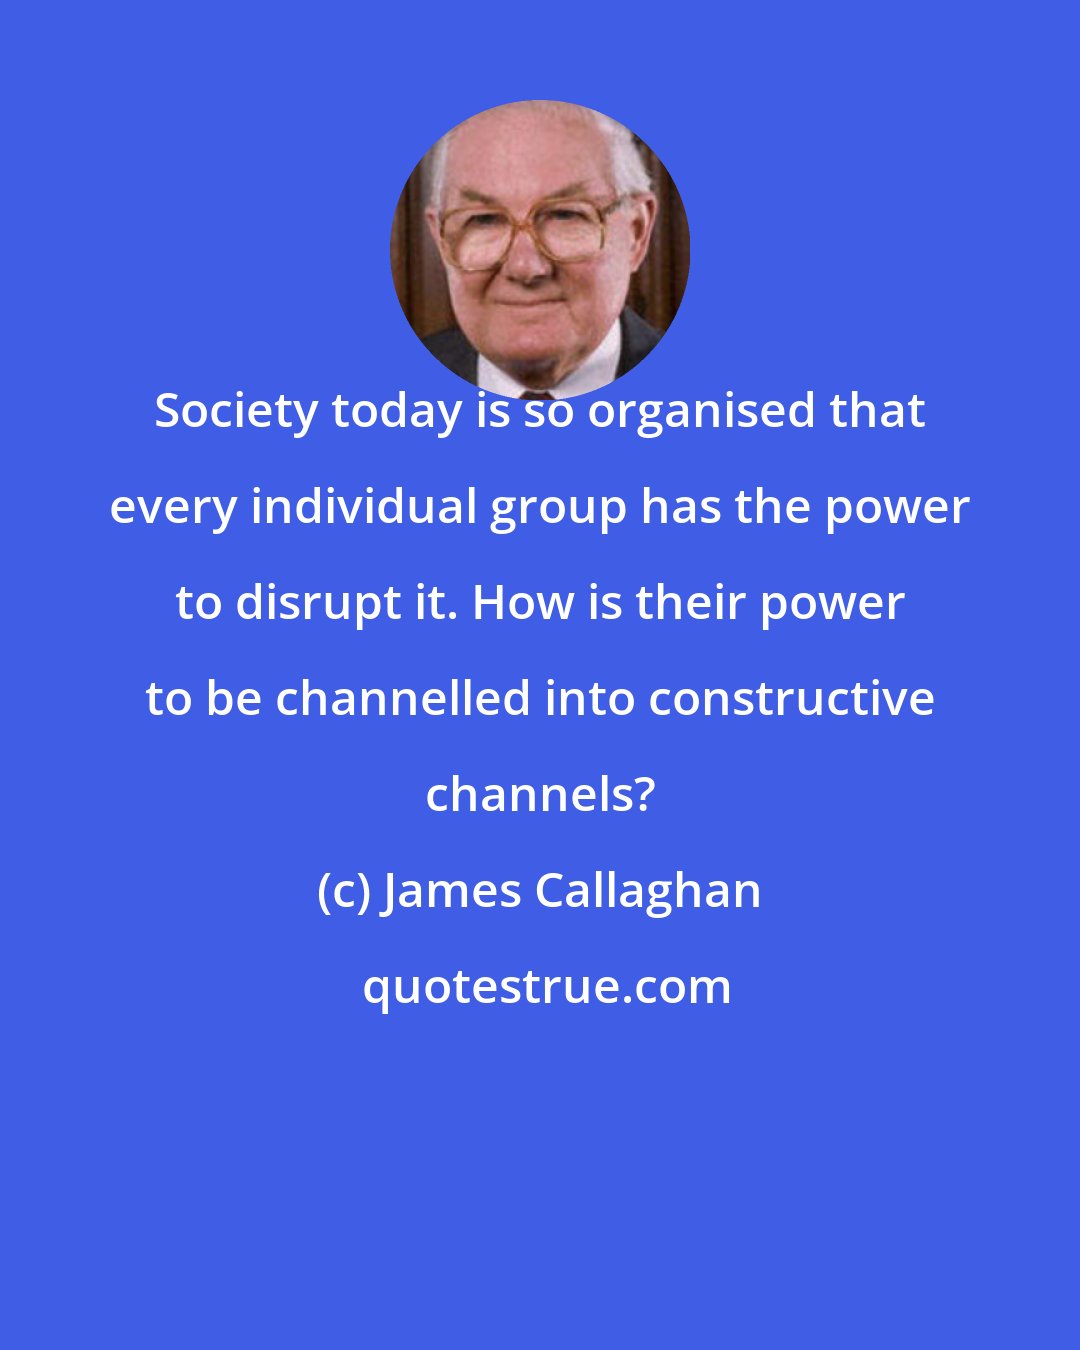 James Callaghan: Society today is so organised that every individual group has the power to disrupt it. How is their power to be channelled into constructive channels?